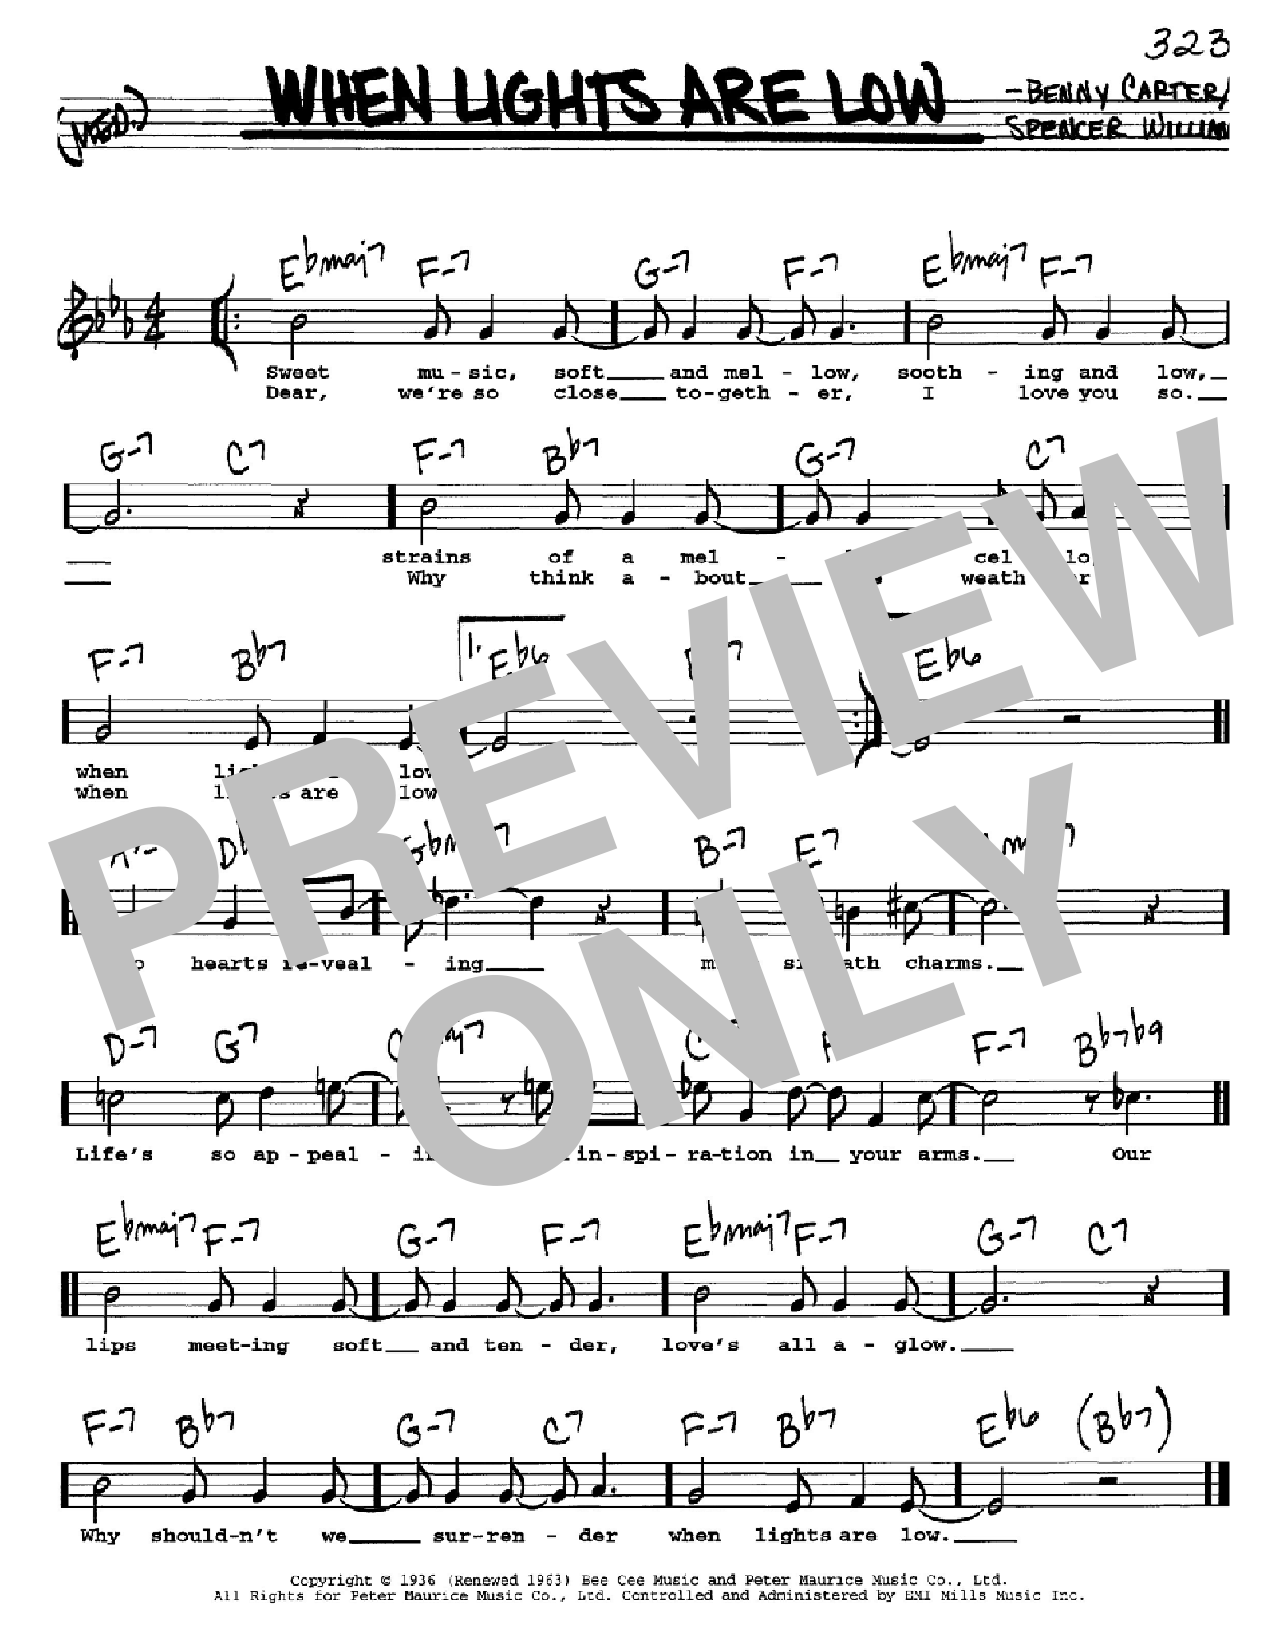 Download Benny Carter When Lights Are Low Sheet Music